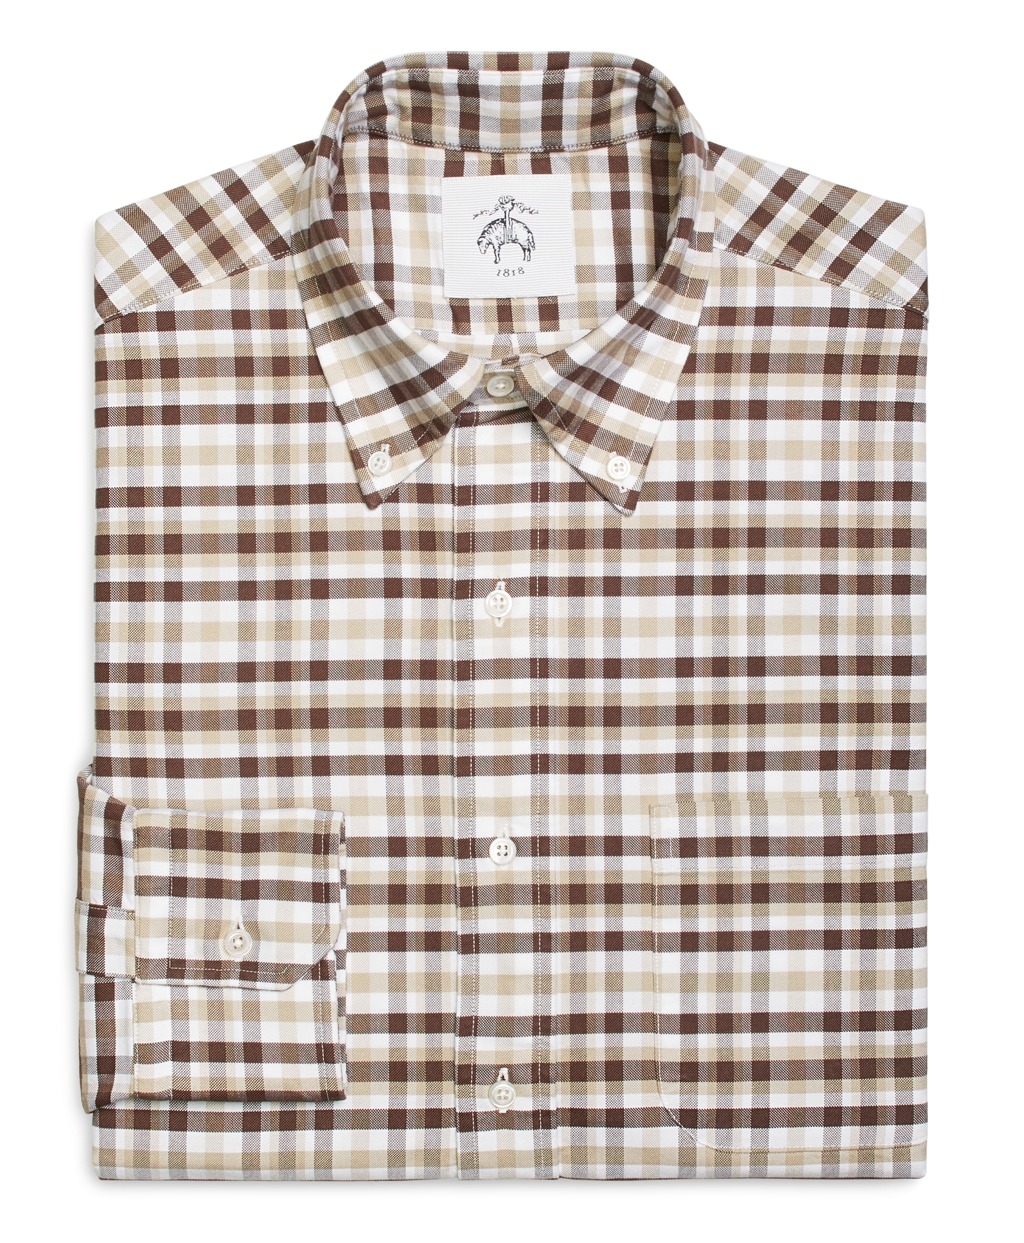 On Sale at Brooks Brothers: Black Fleece Shirts | This Fits 